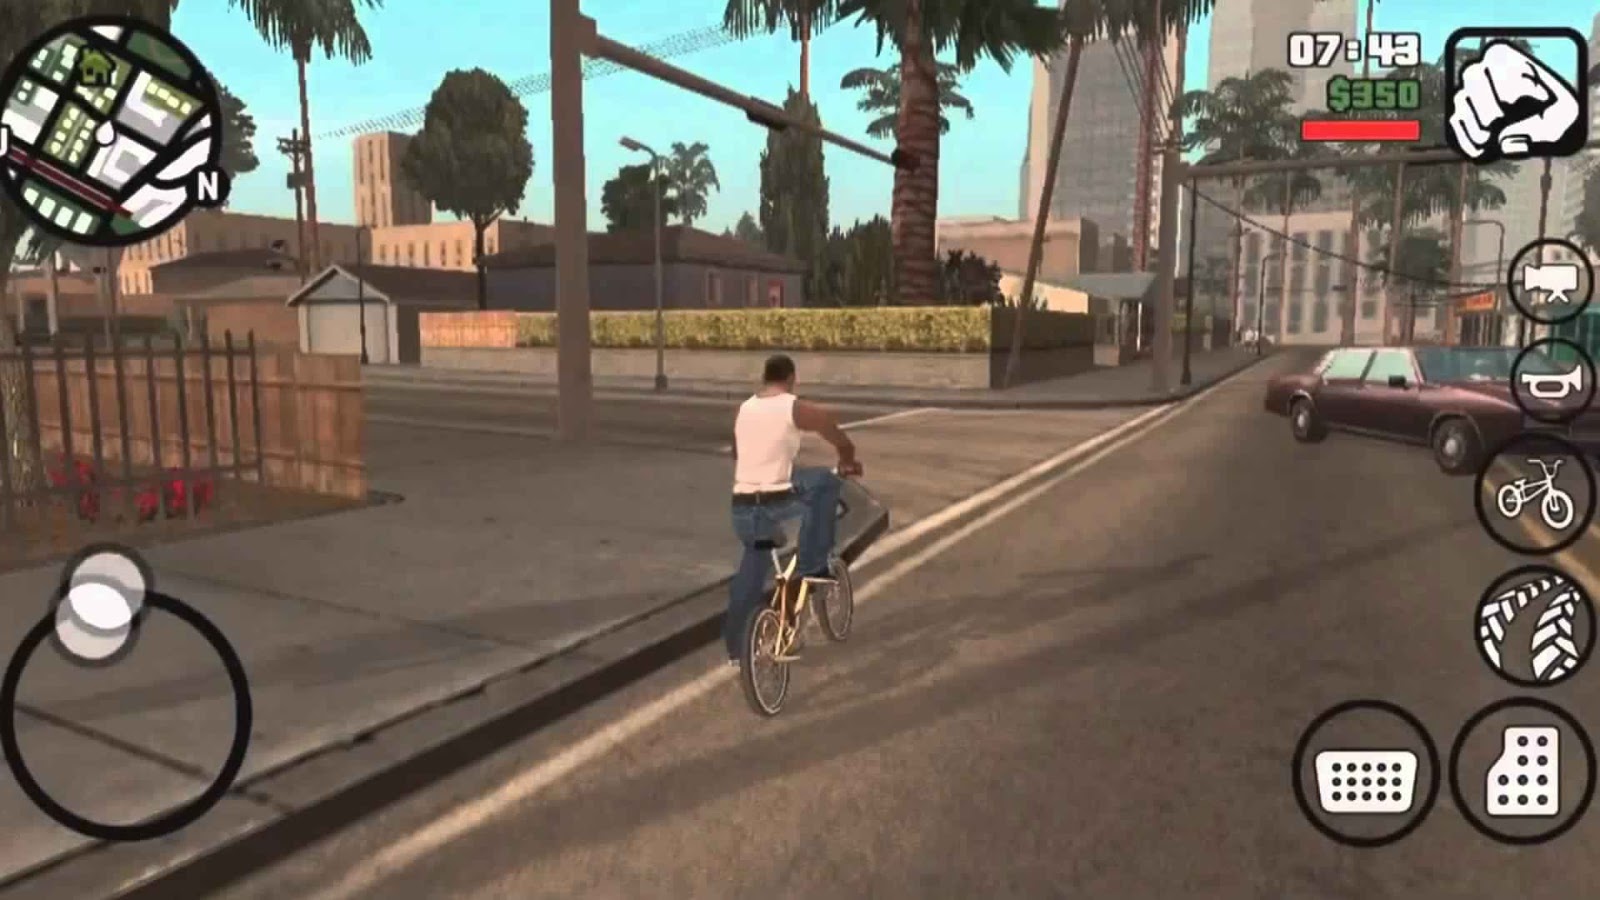 Download gta san andreas full game for android apk